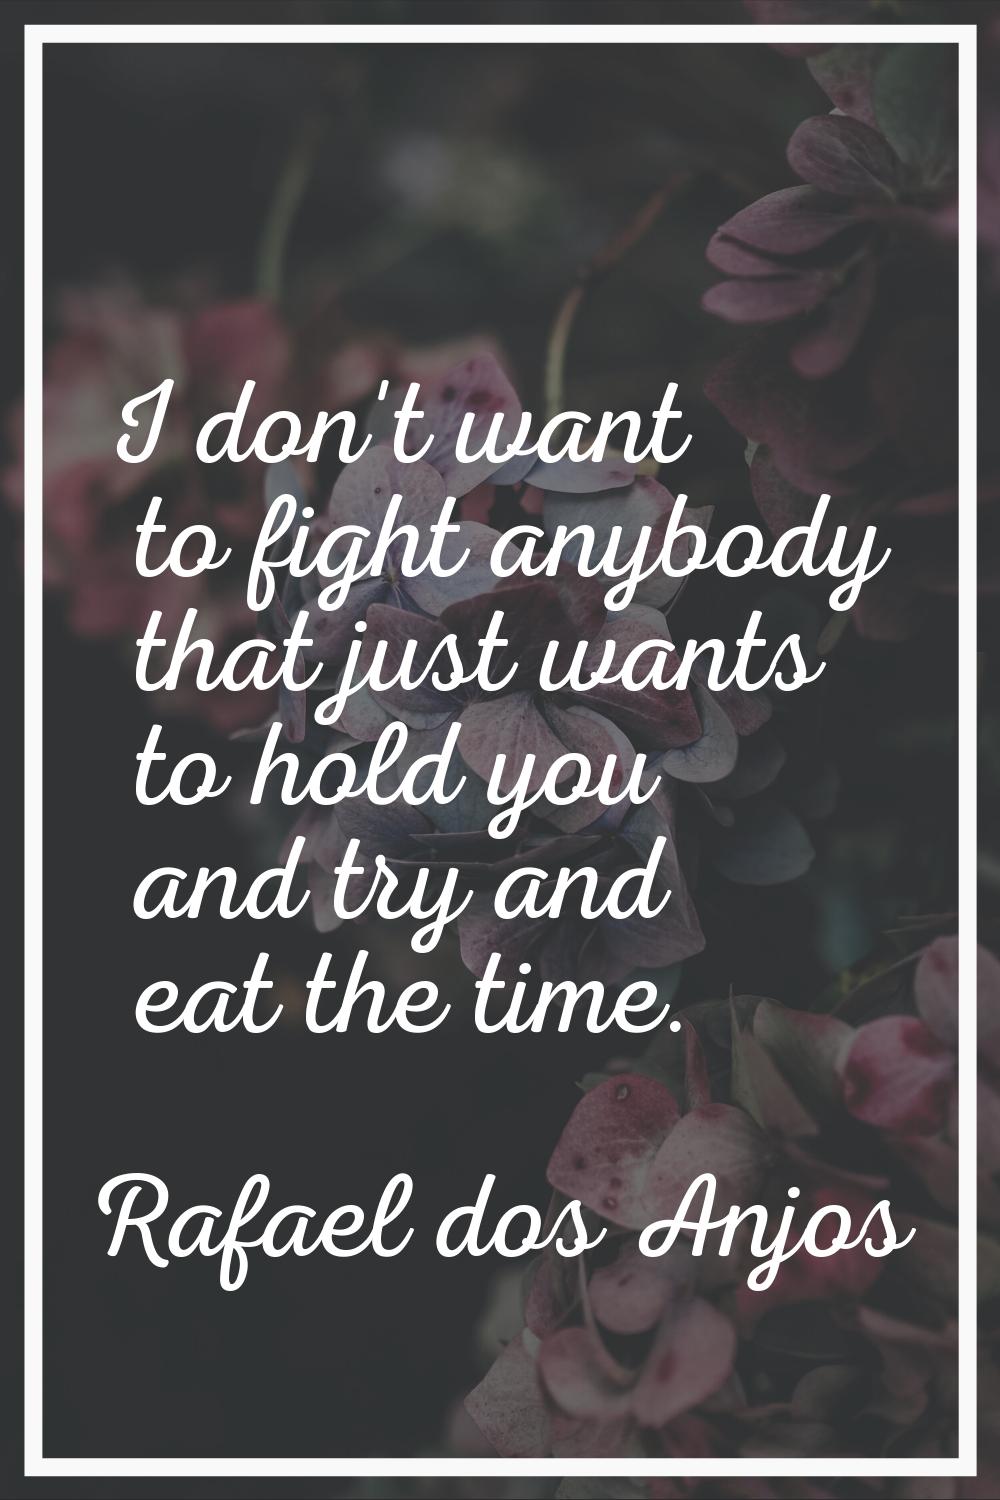 I don't want to fight anybody that just wants to hold you and try and eat the time.